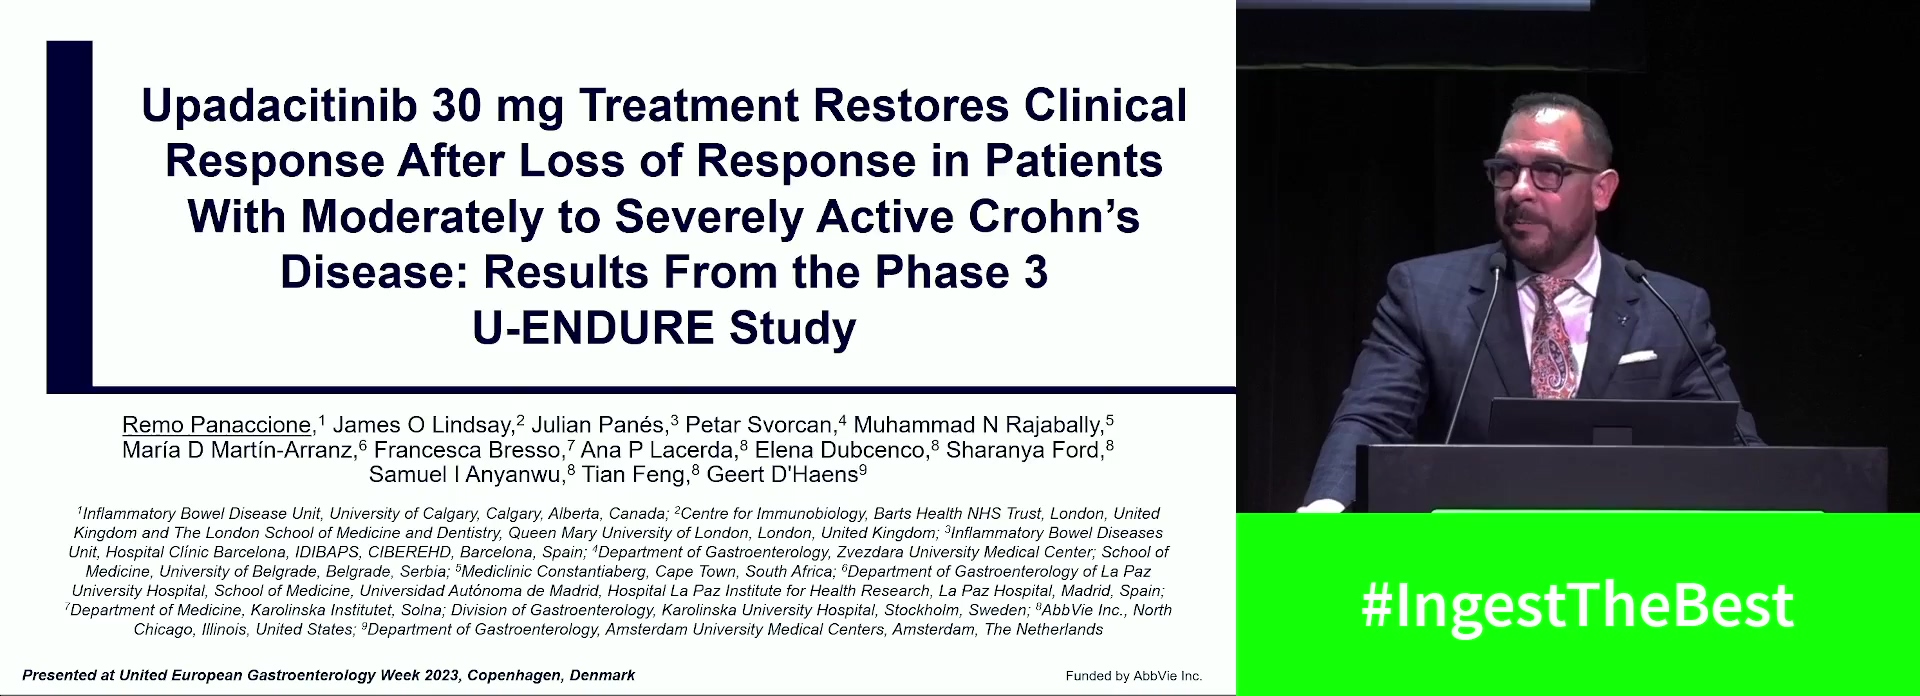 UPADACITINIB 30 MG TREATMENT RESTORES CLINICAL RESPONSE AFTER LOSS OF RESPONSE IN PATIENTS WITH MODERATELY TO SEVERELY ACTIVE CROHN’S DISEASE: RESULTS FROM THE PHASE 3 U-ENDURE STUDY